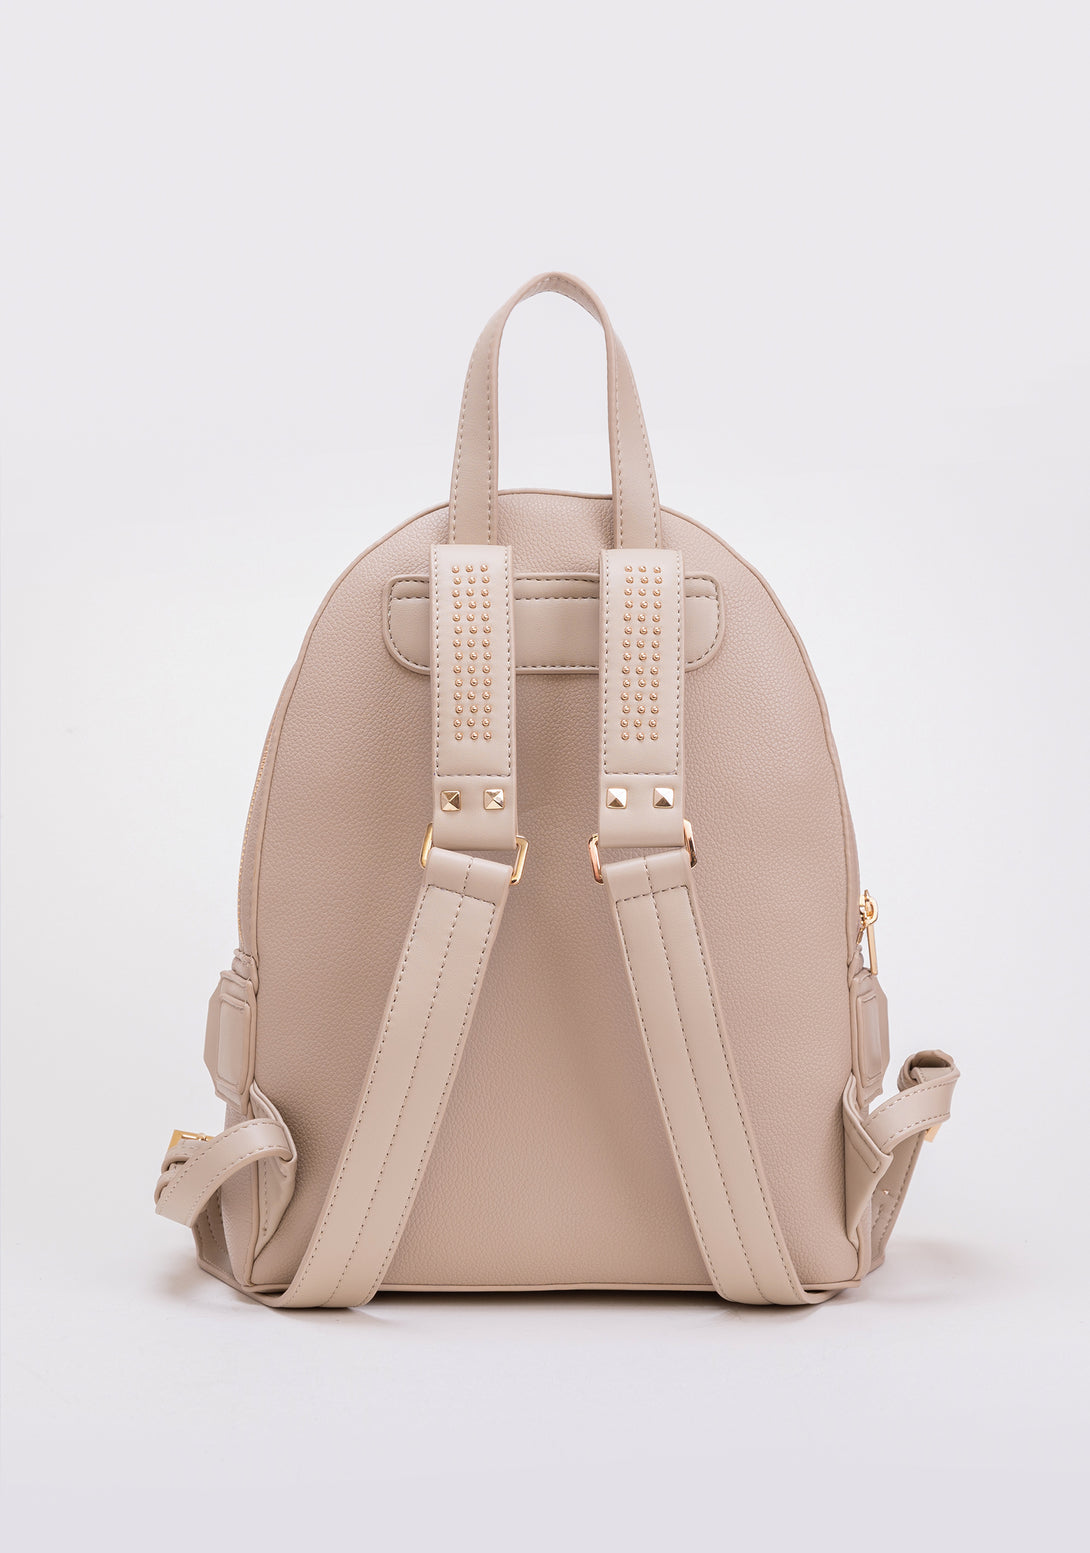 Backpack made in eco leather with metallic details Fracomina FA23WB2002P434Y4-R34-3